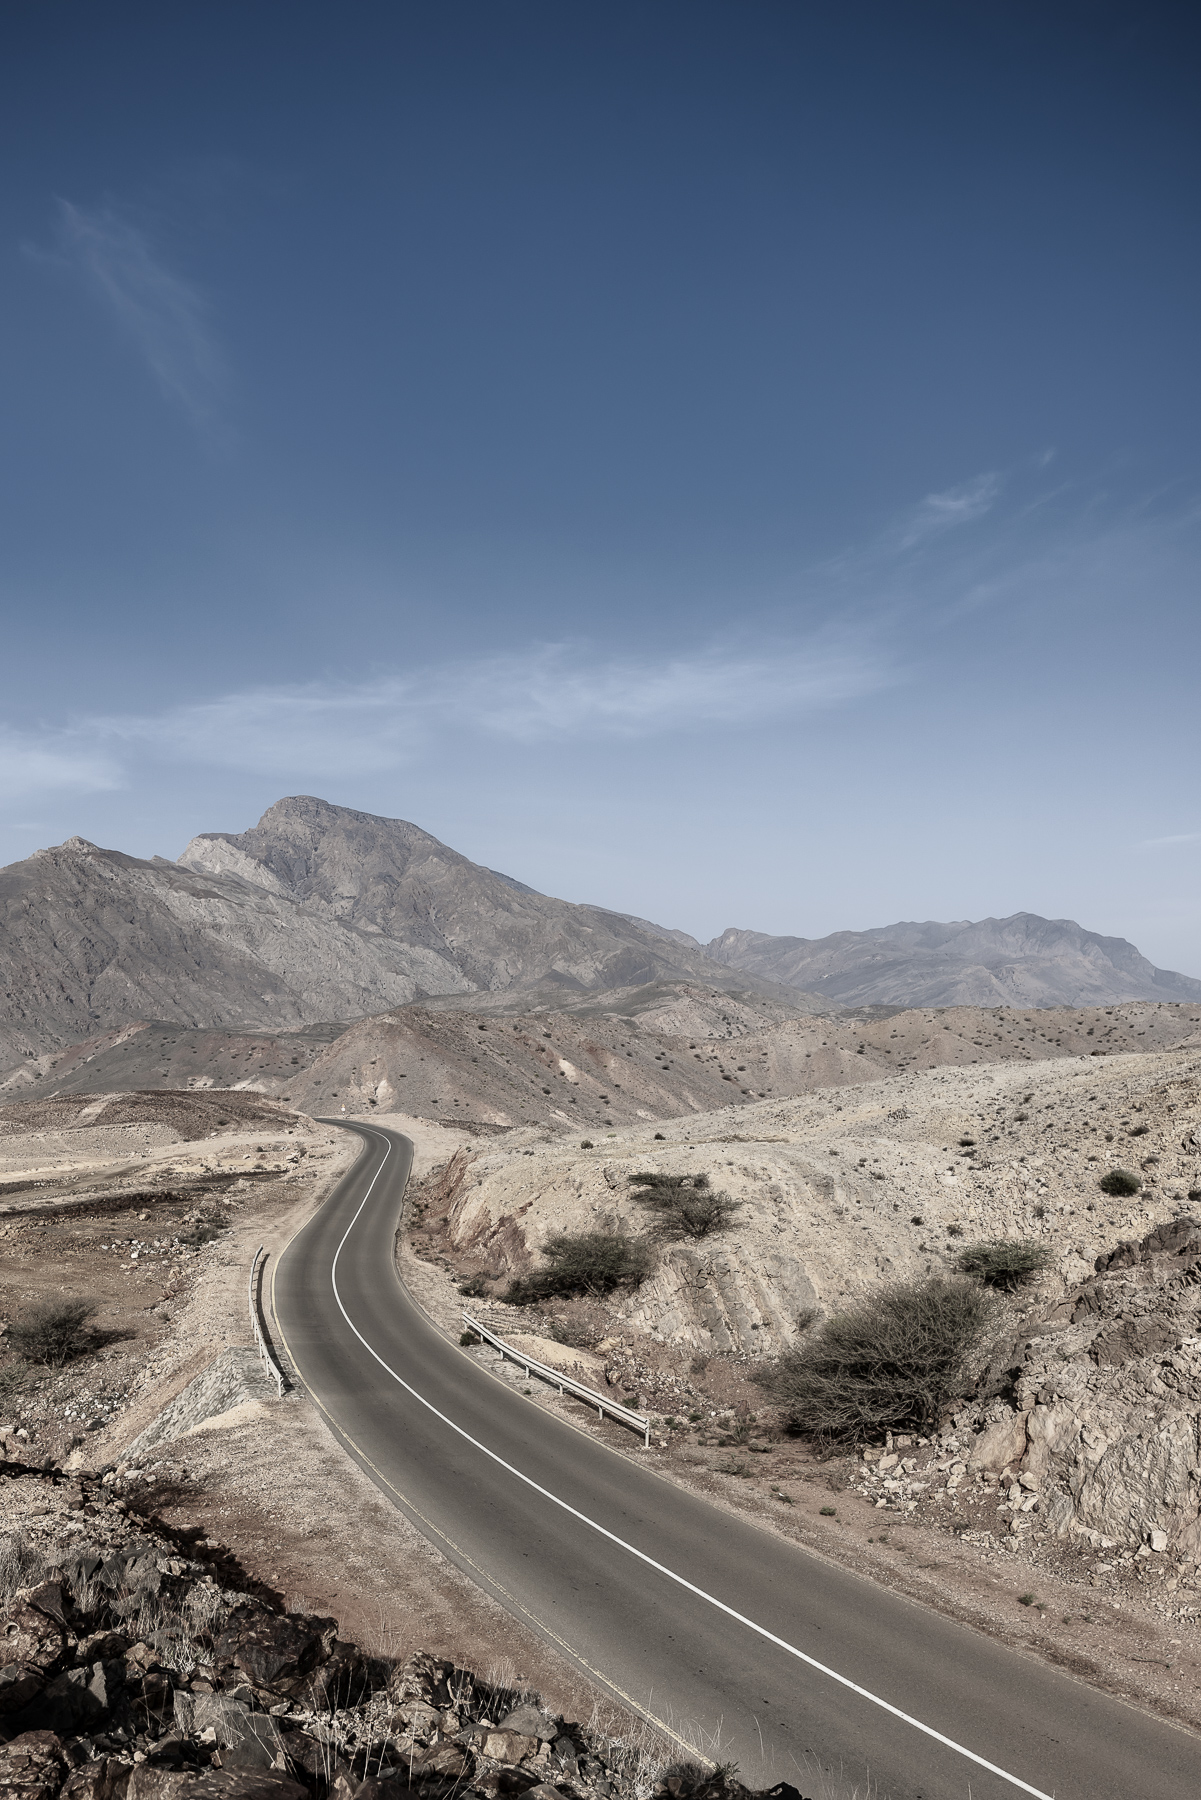 "Tariq", A road going thru the deserted mountains of the Sultanate of Oman "Tariq" means road in Arabic